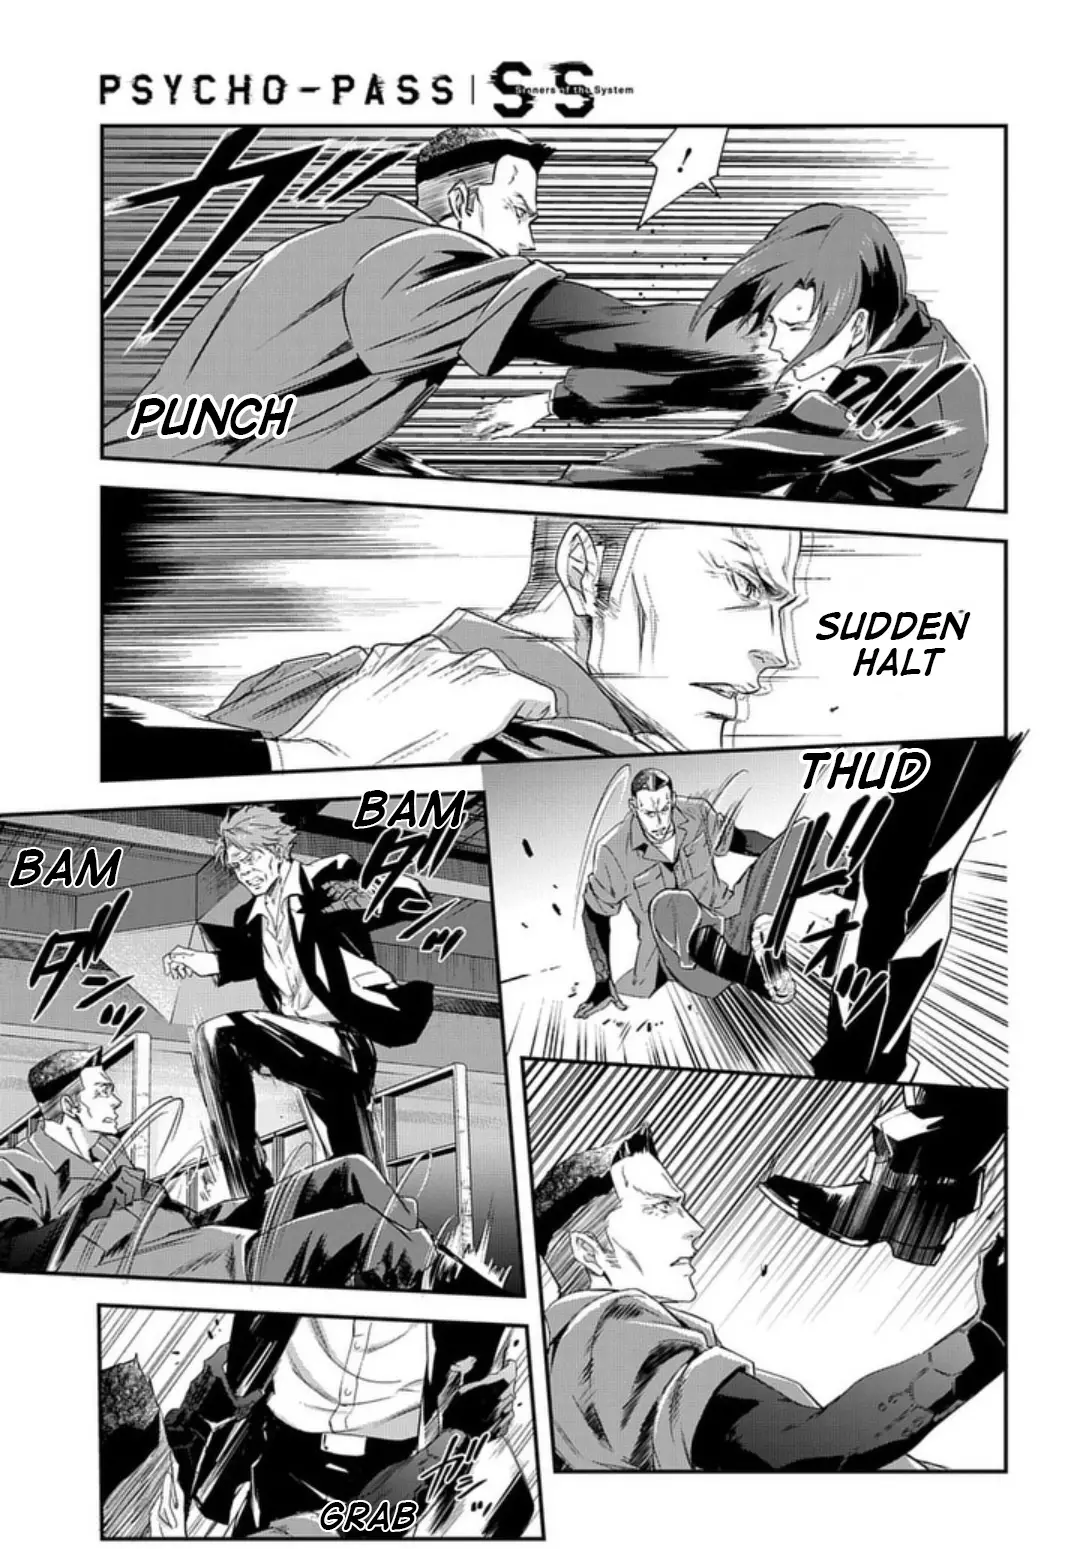 Psycho-Pass: Sinners Of The System Case 2 - First Guardian - 5 page 11-4a7f18d3